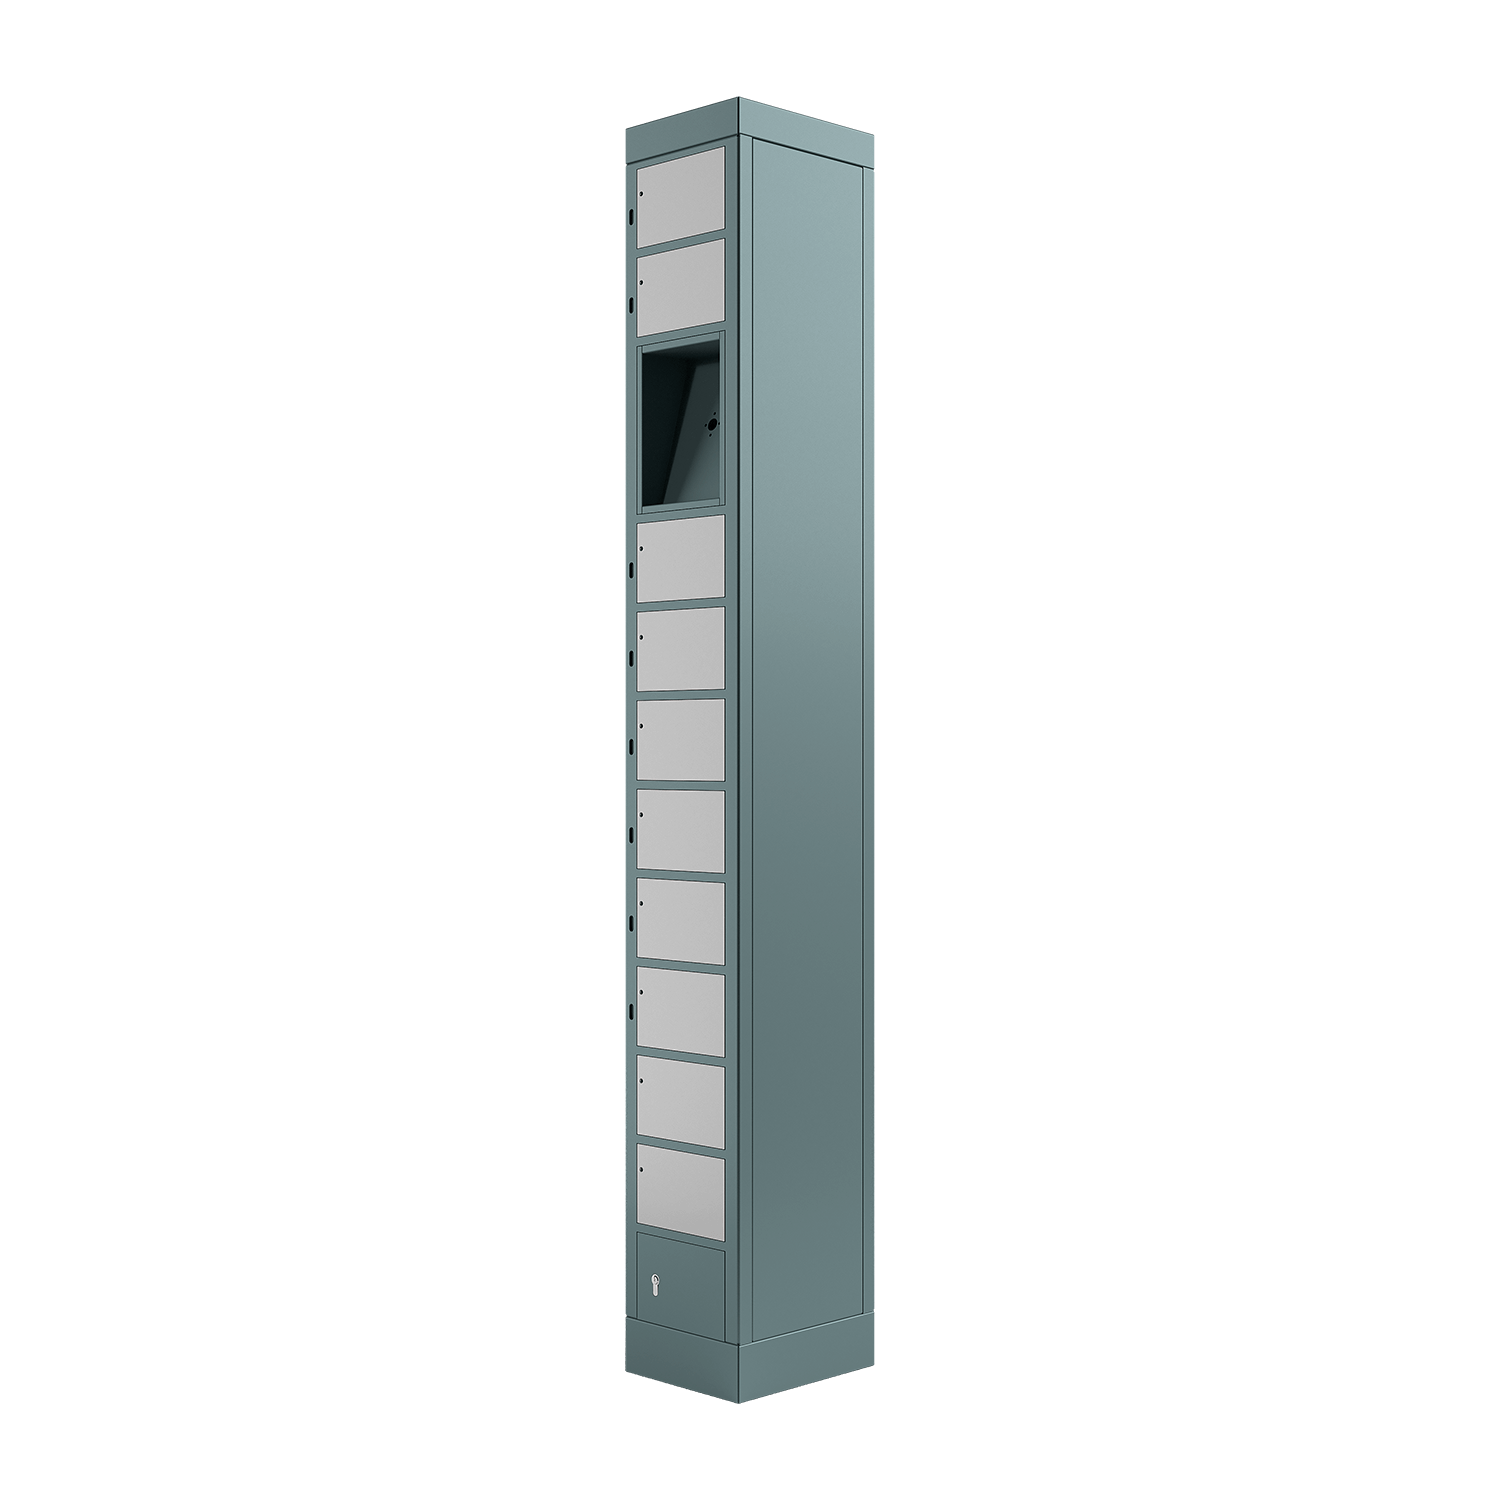 locker compartment system, size S, with 10 compartments, space for user terminal, right view